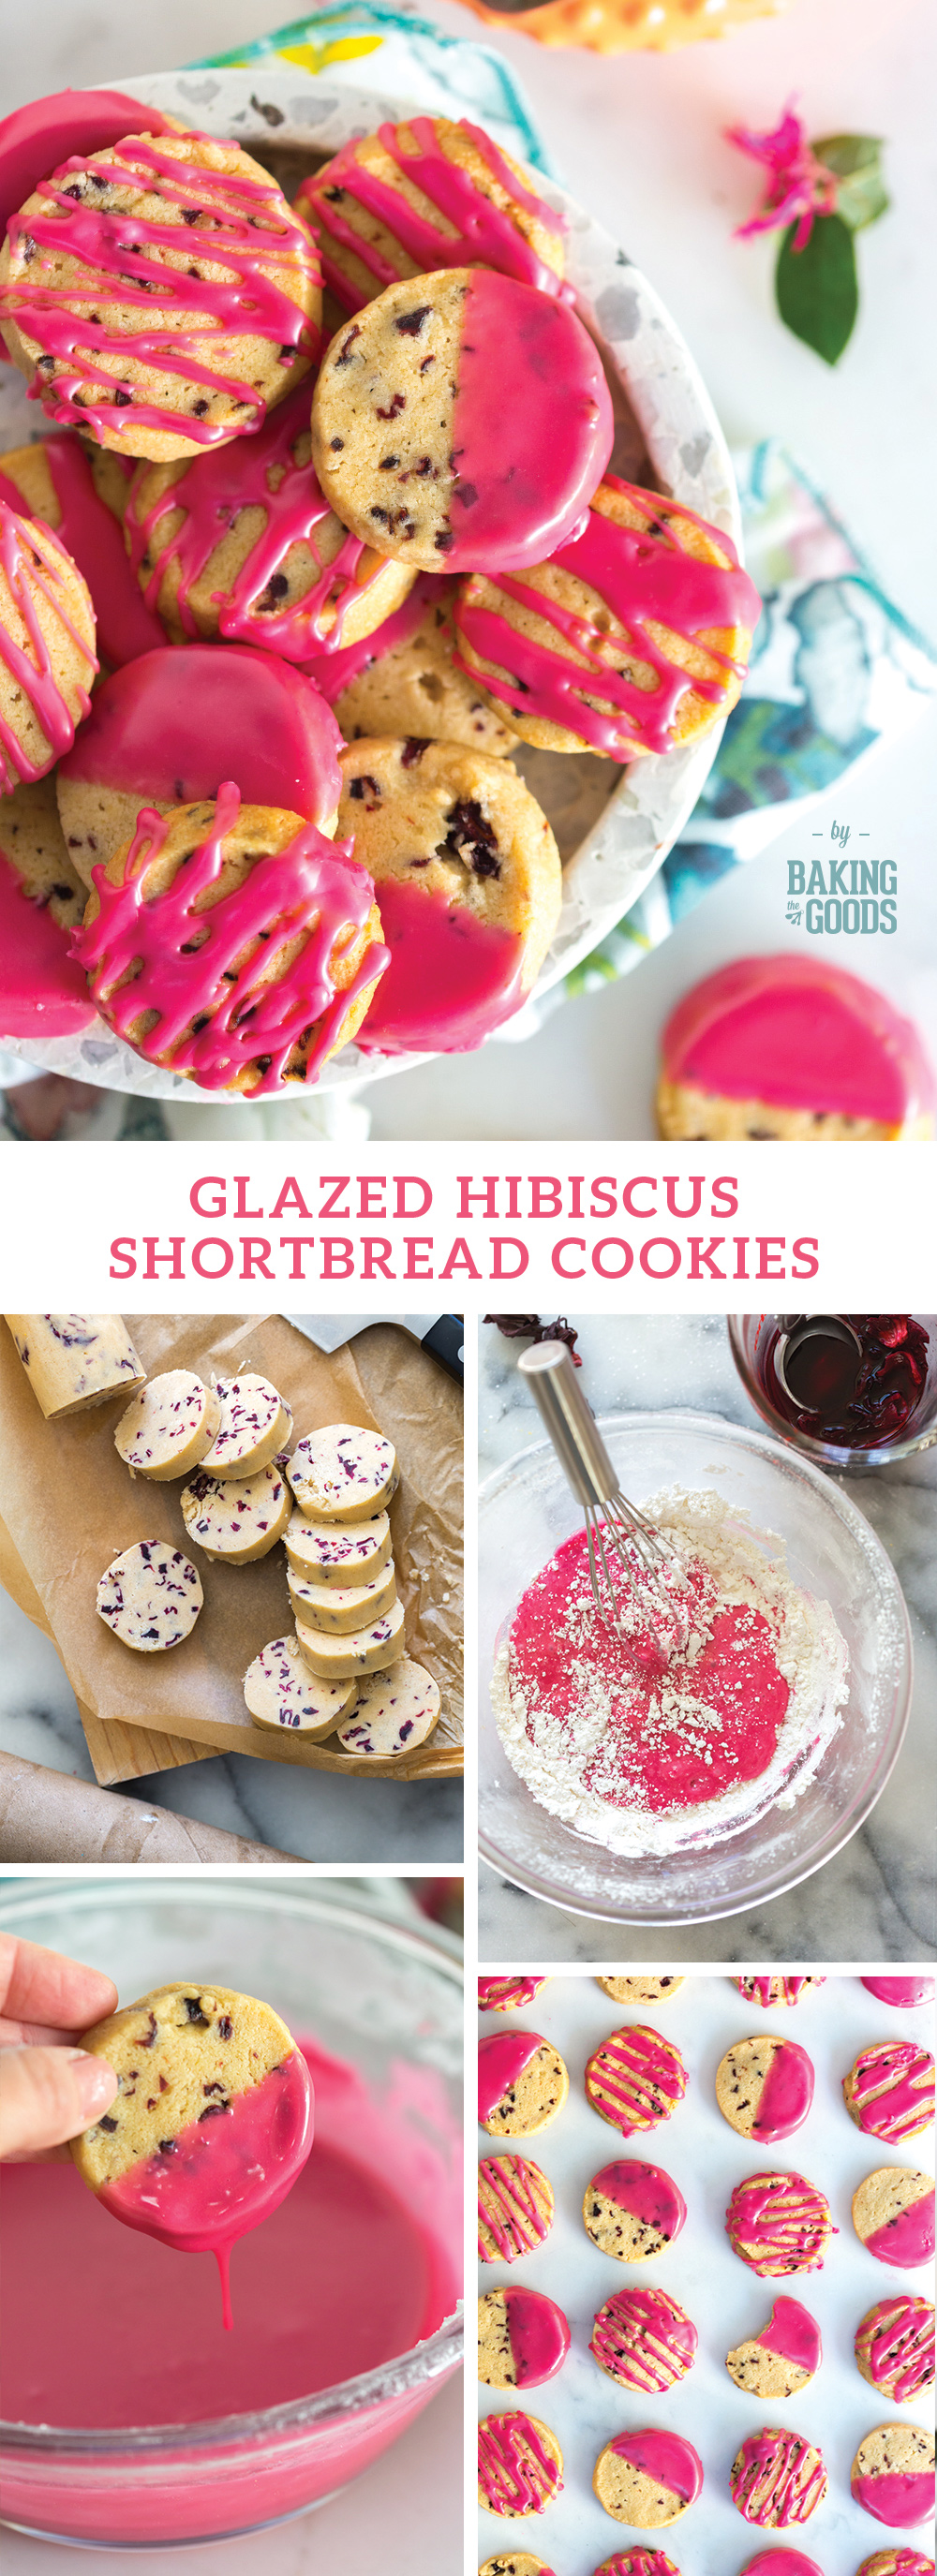 Glazed Hibiscus Shortbread Cookies by Baking The Goods